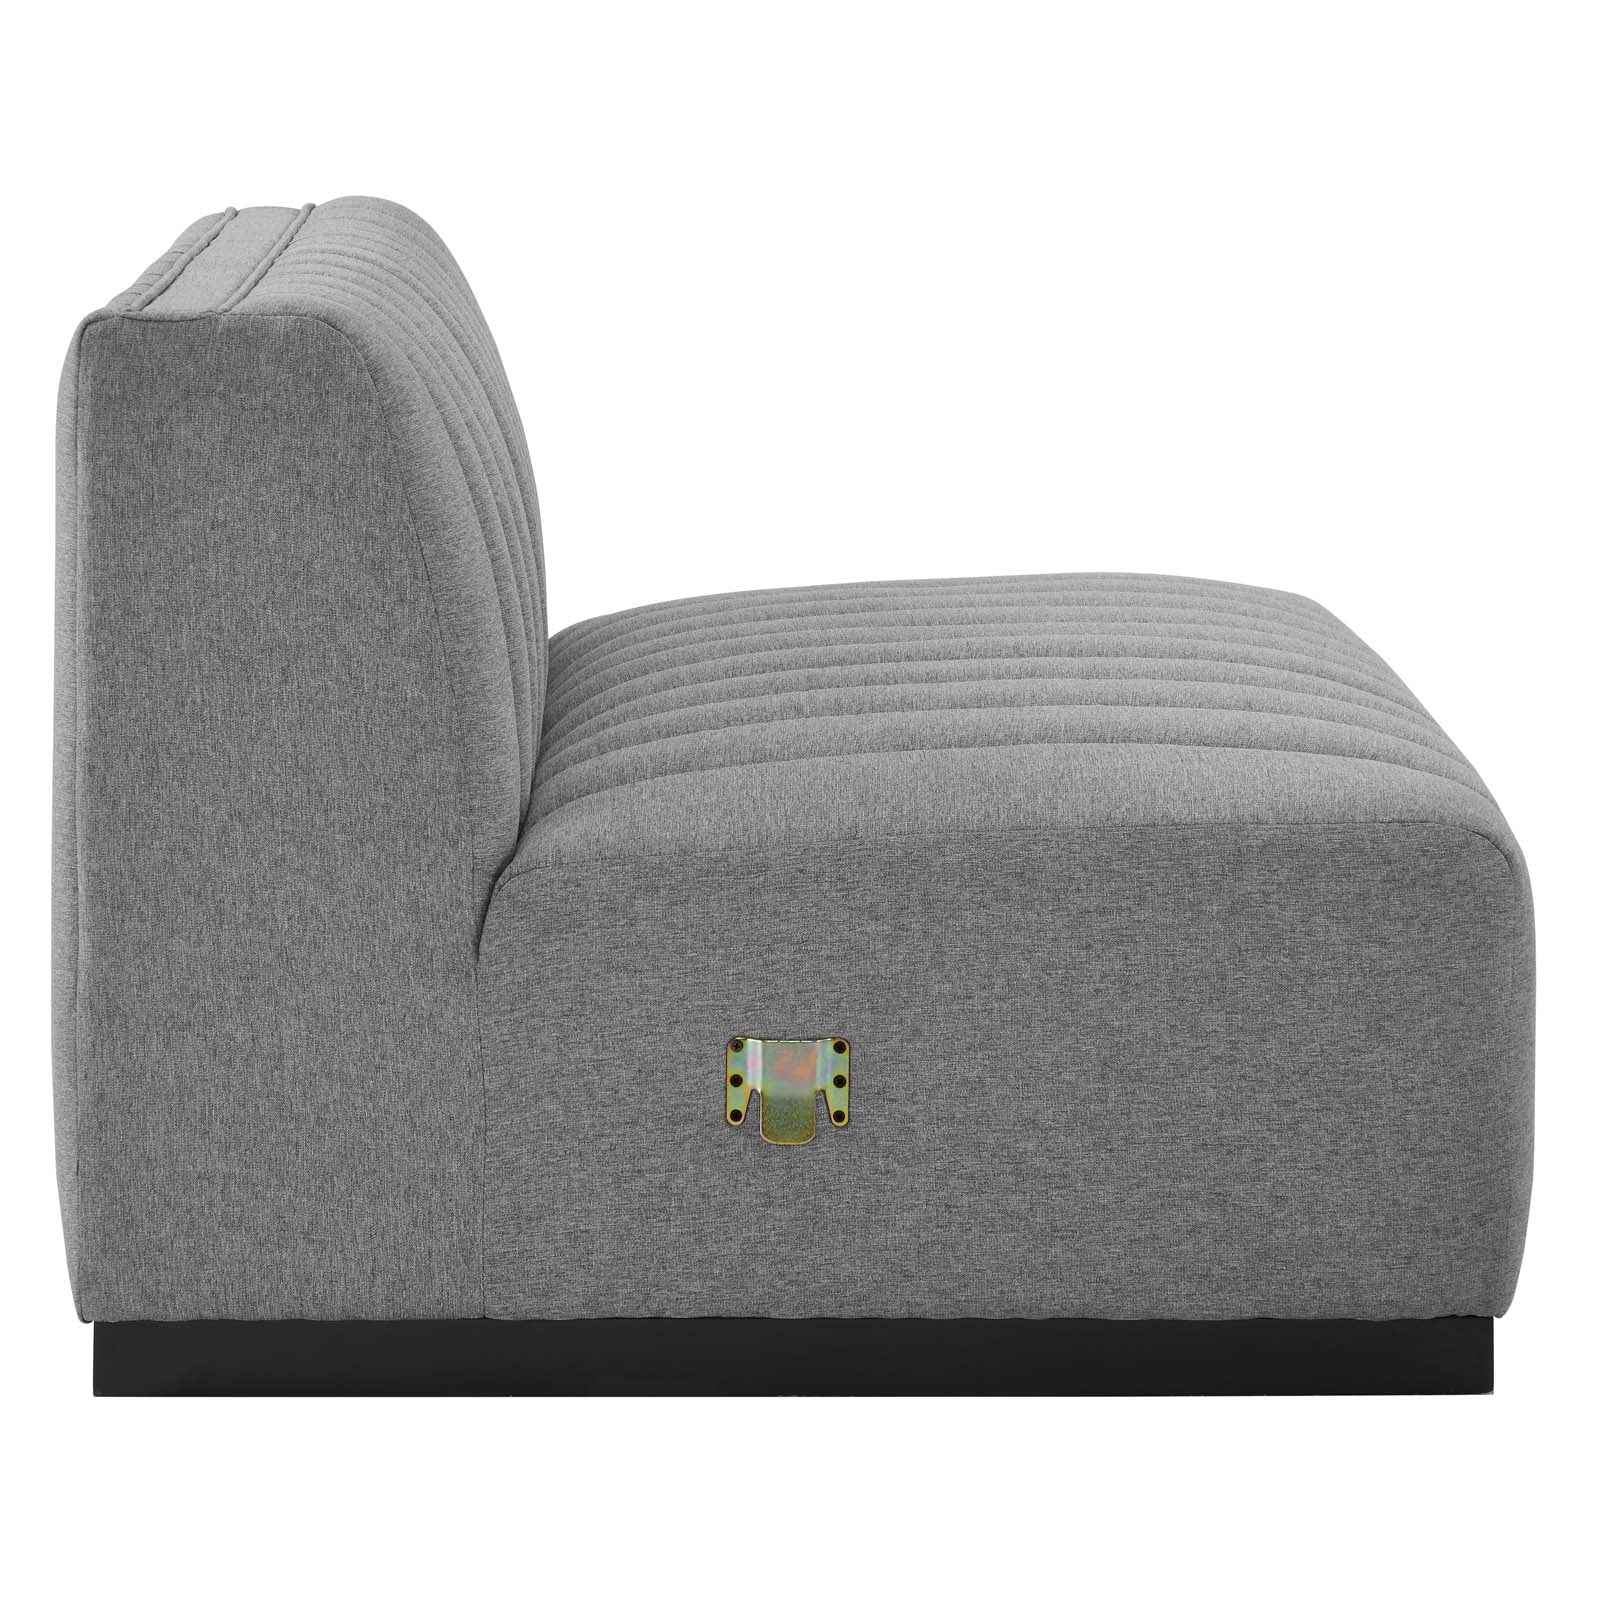 Modway Accent Chairs - Conjure Channel Tufted Upholstered Fabric Armless Chair Black Light Gray